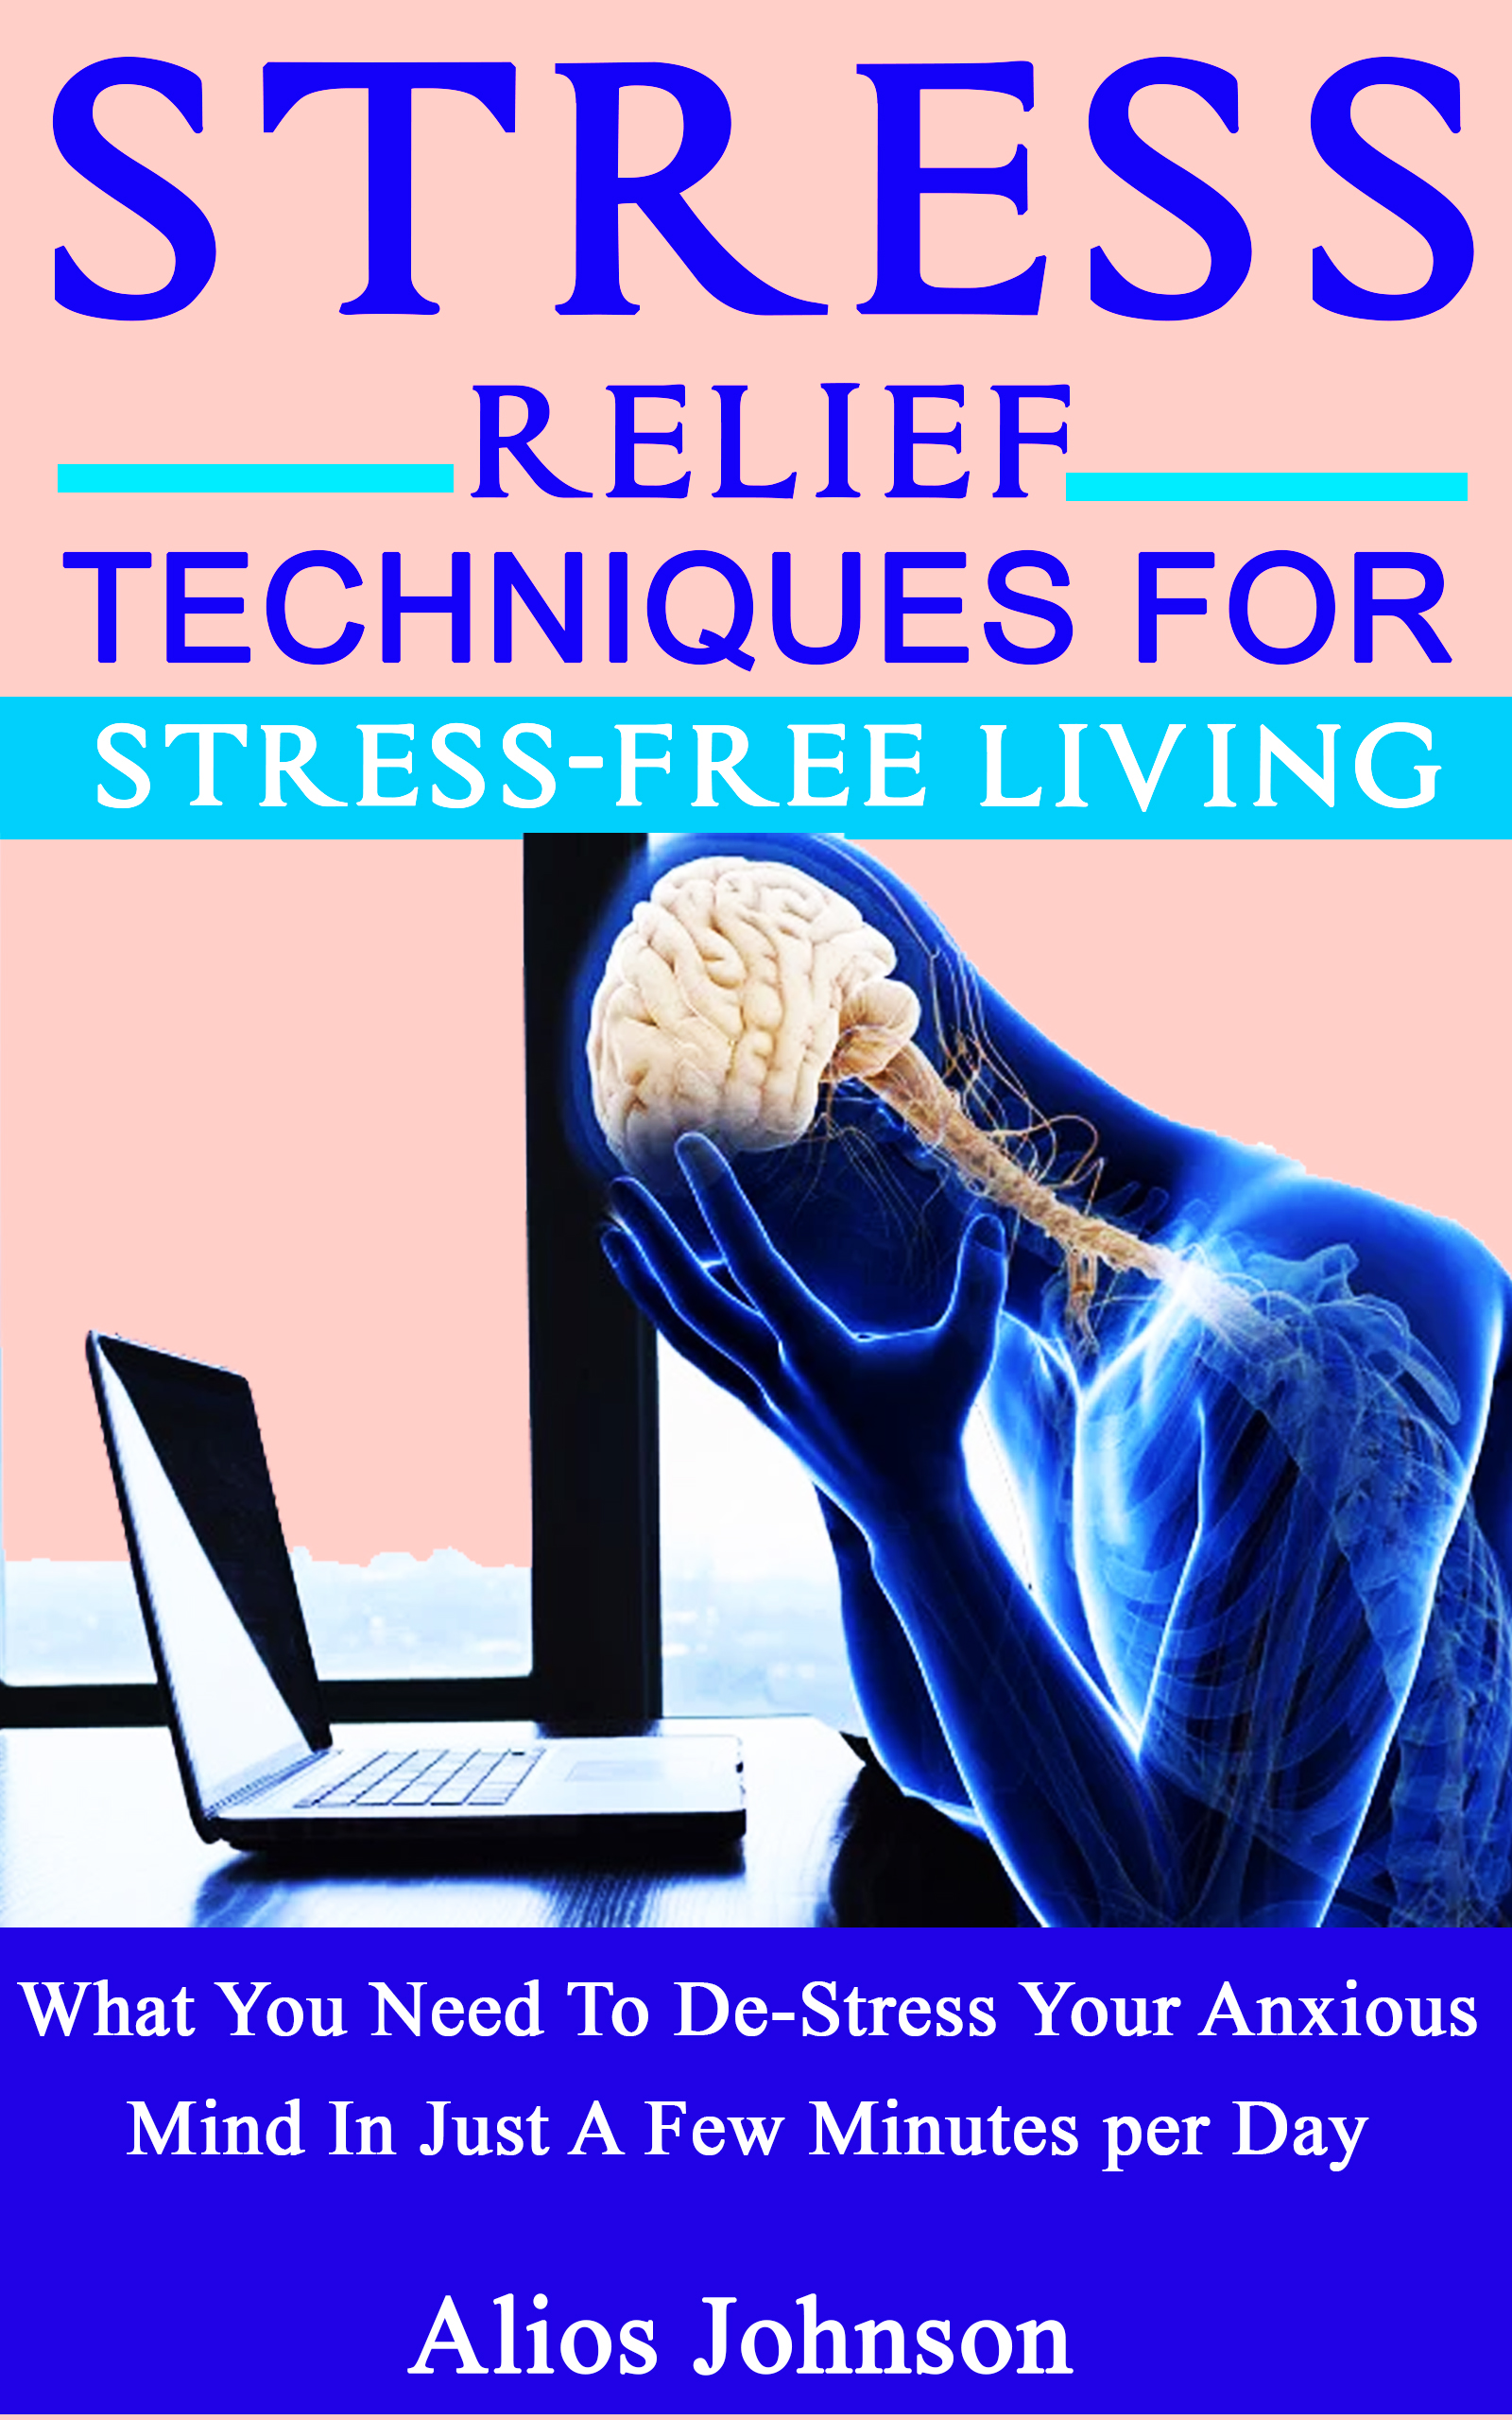 FREE: Stress Relief Techniques For Stress-Free Living by Alios Johnson